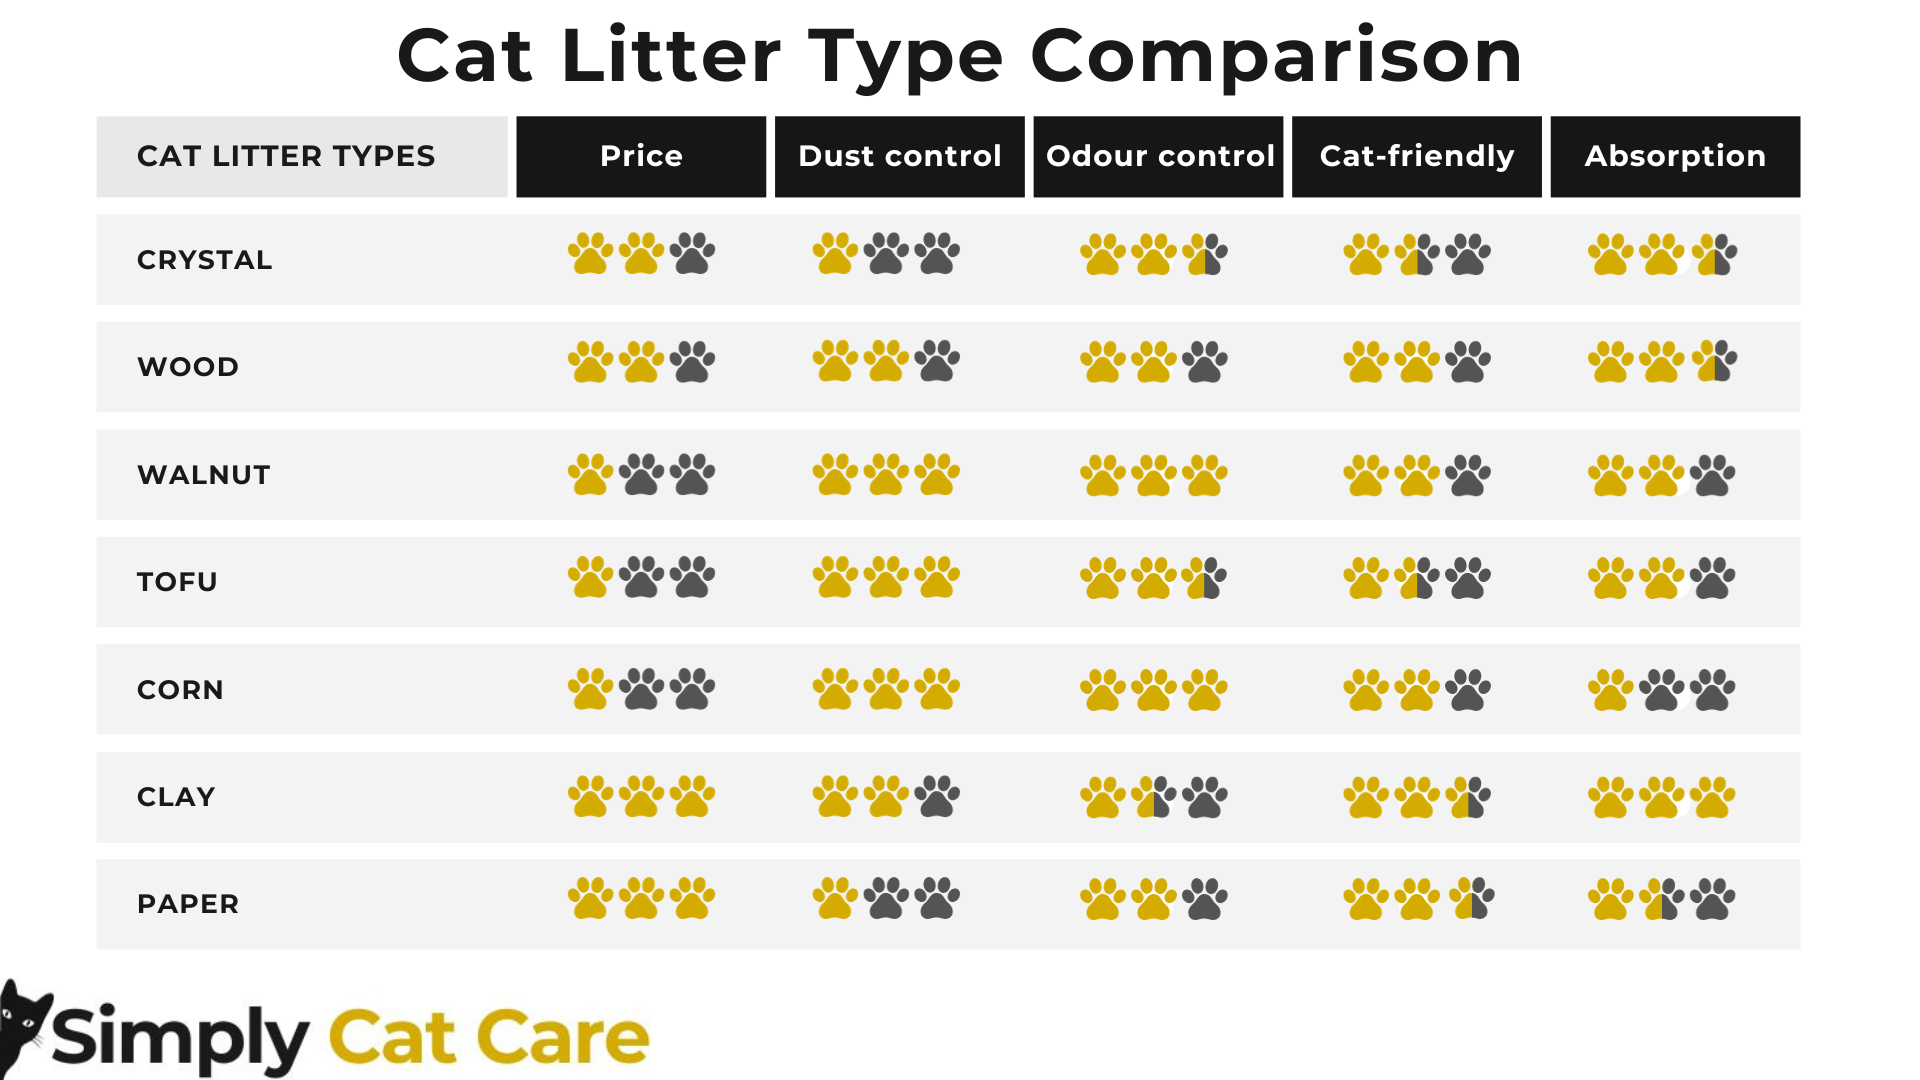 A visual comparison of different types of cat litter.